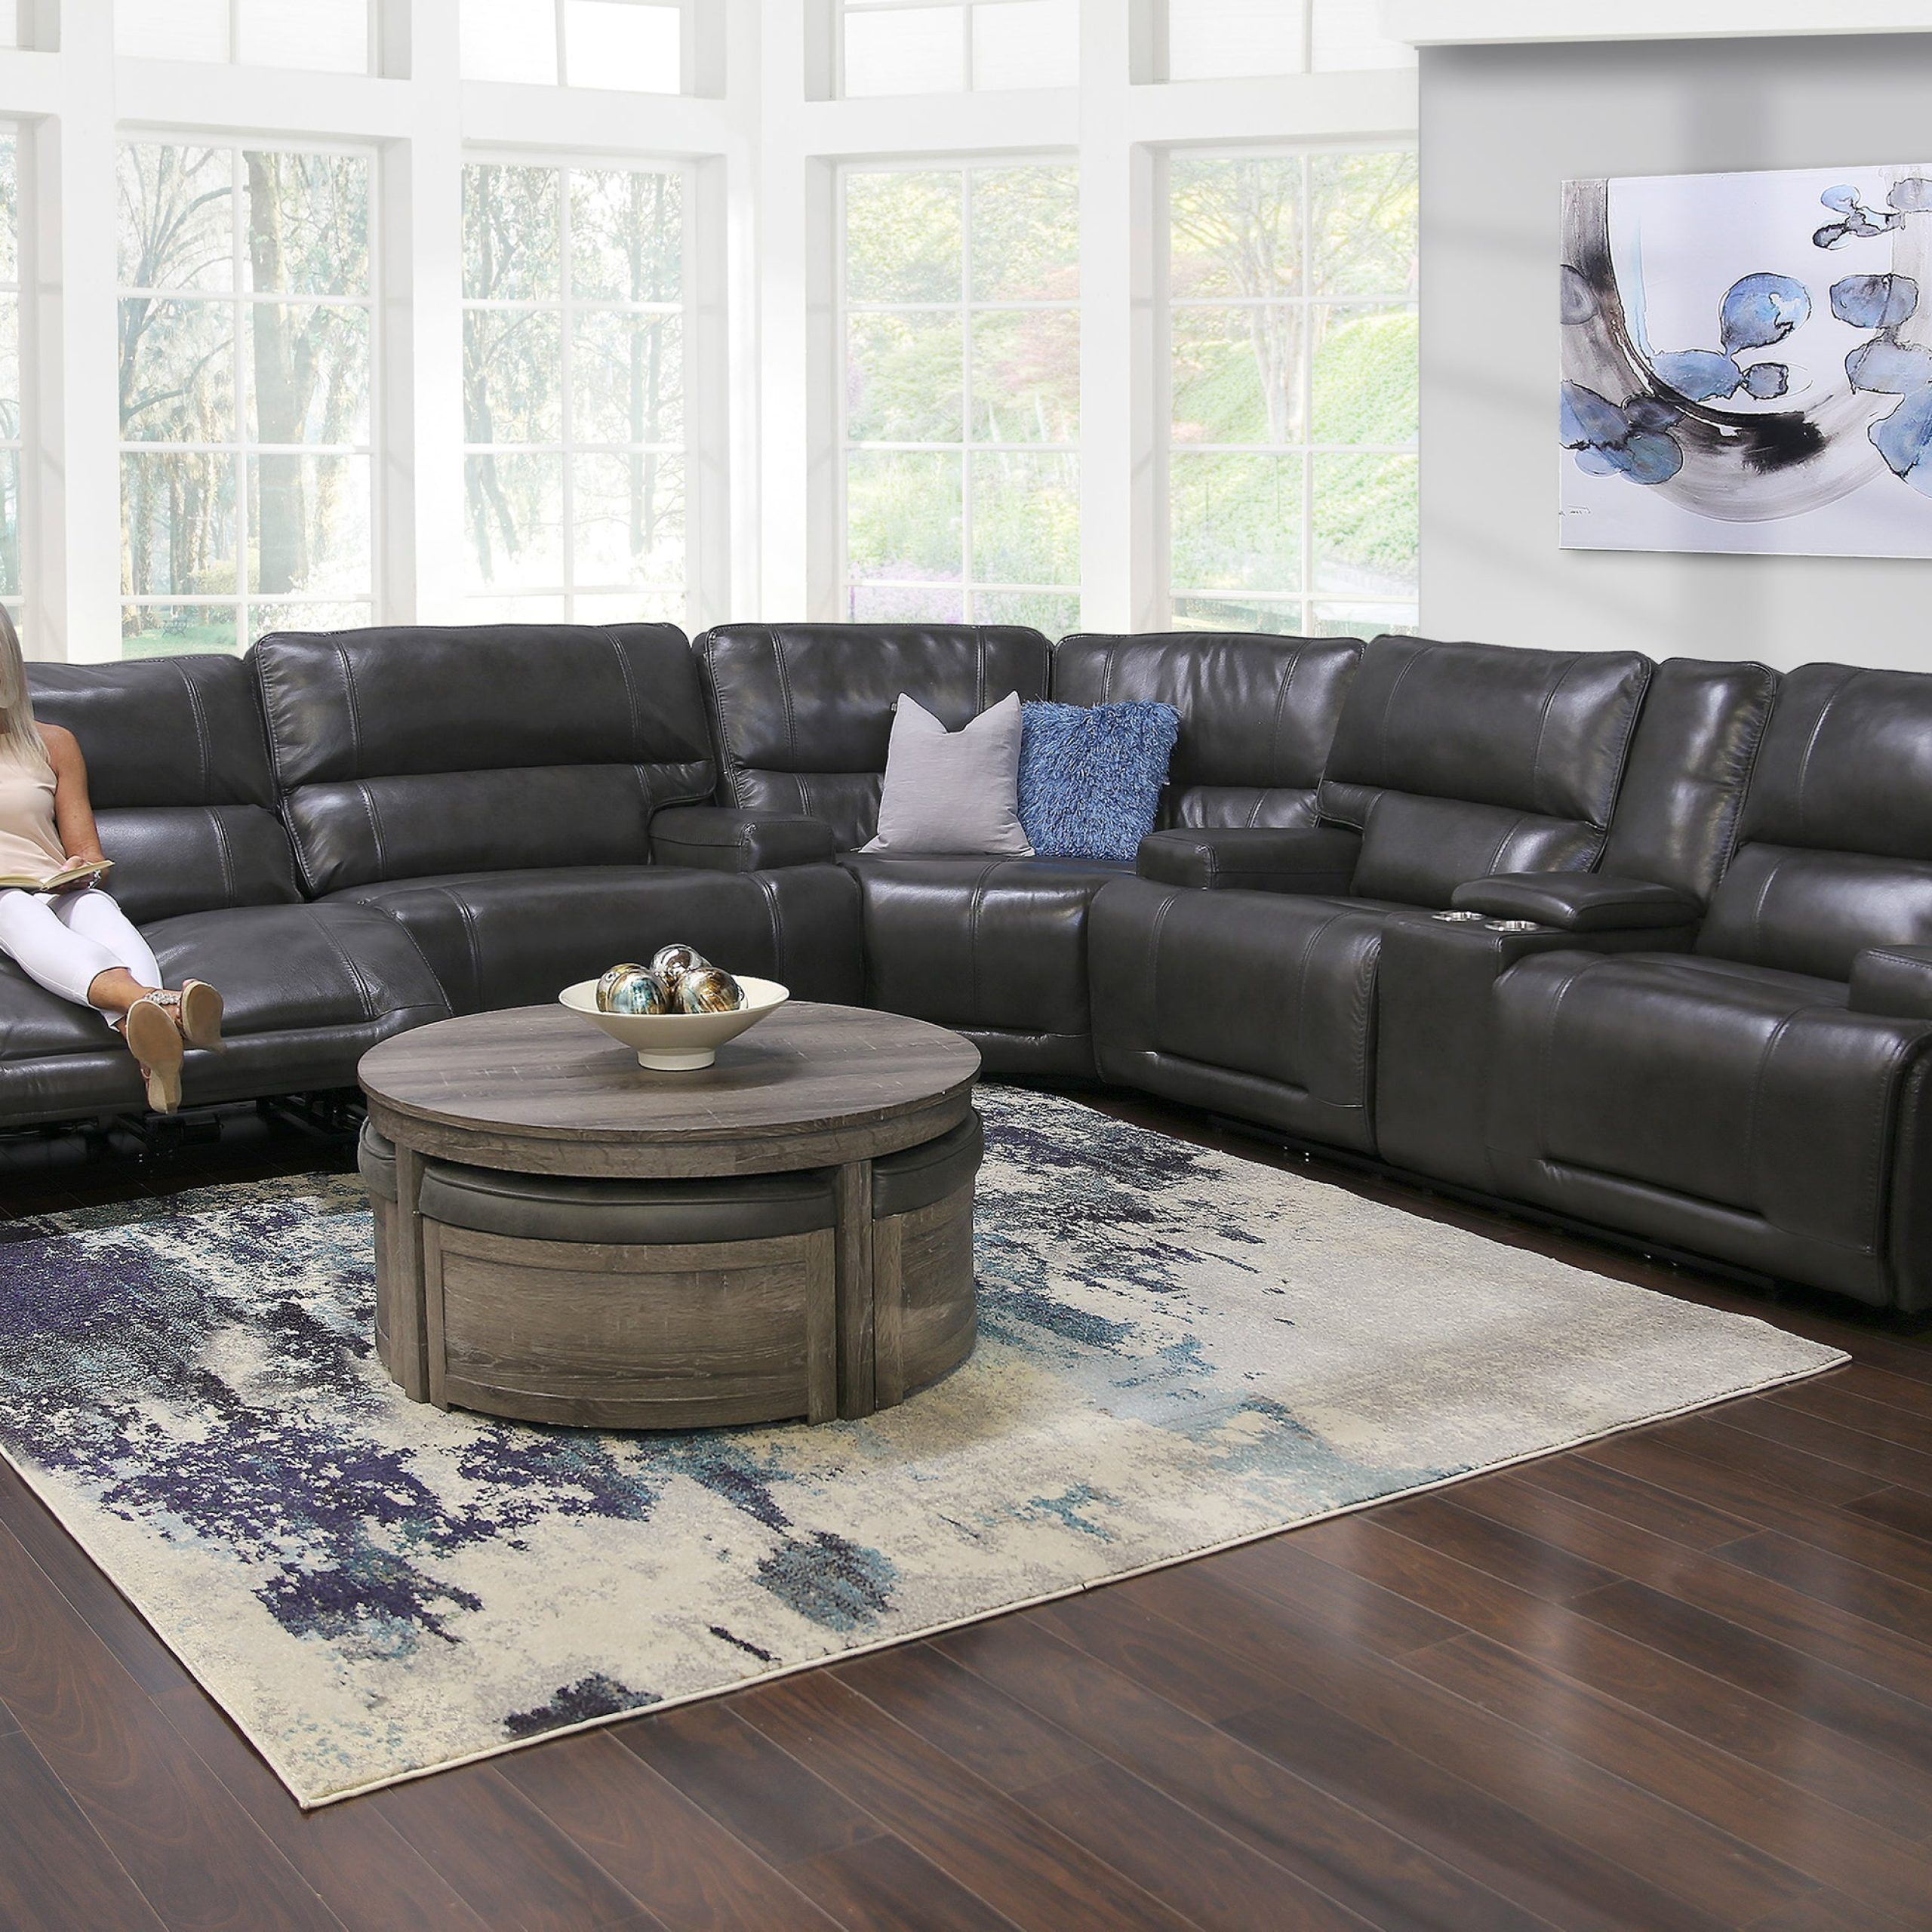 Nova 3 Piece Leather Triple Power Reclining Sectional Sofa With Regard To 3 Piece Leather Sectional Sofa Sets (View 7 of 20)